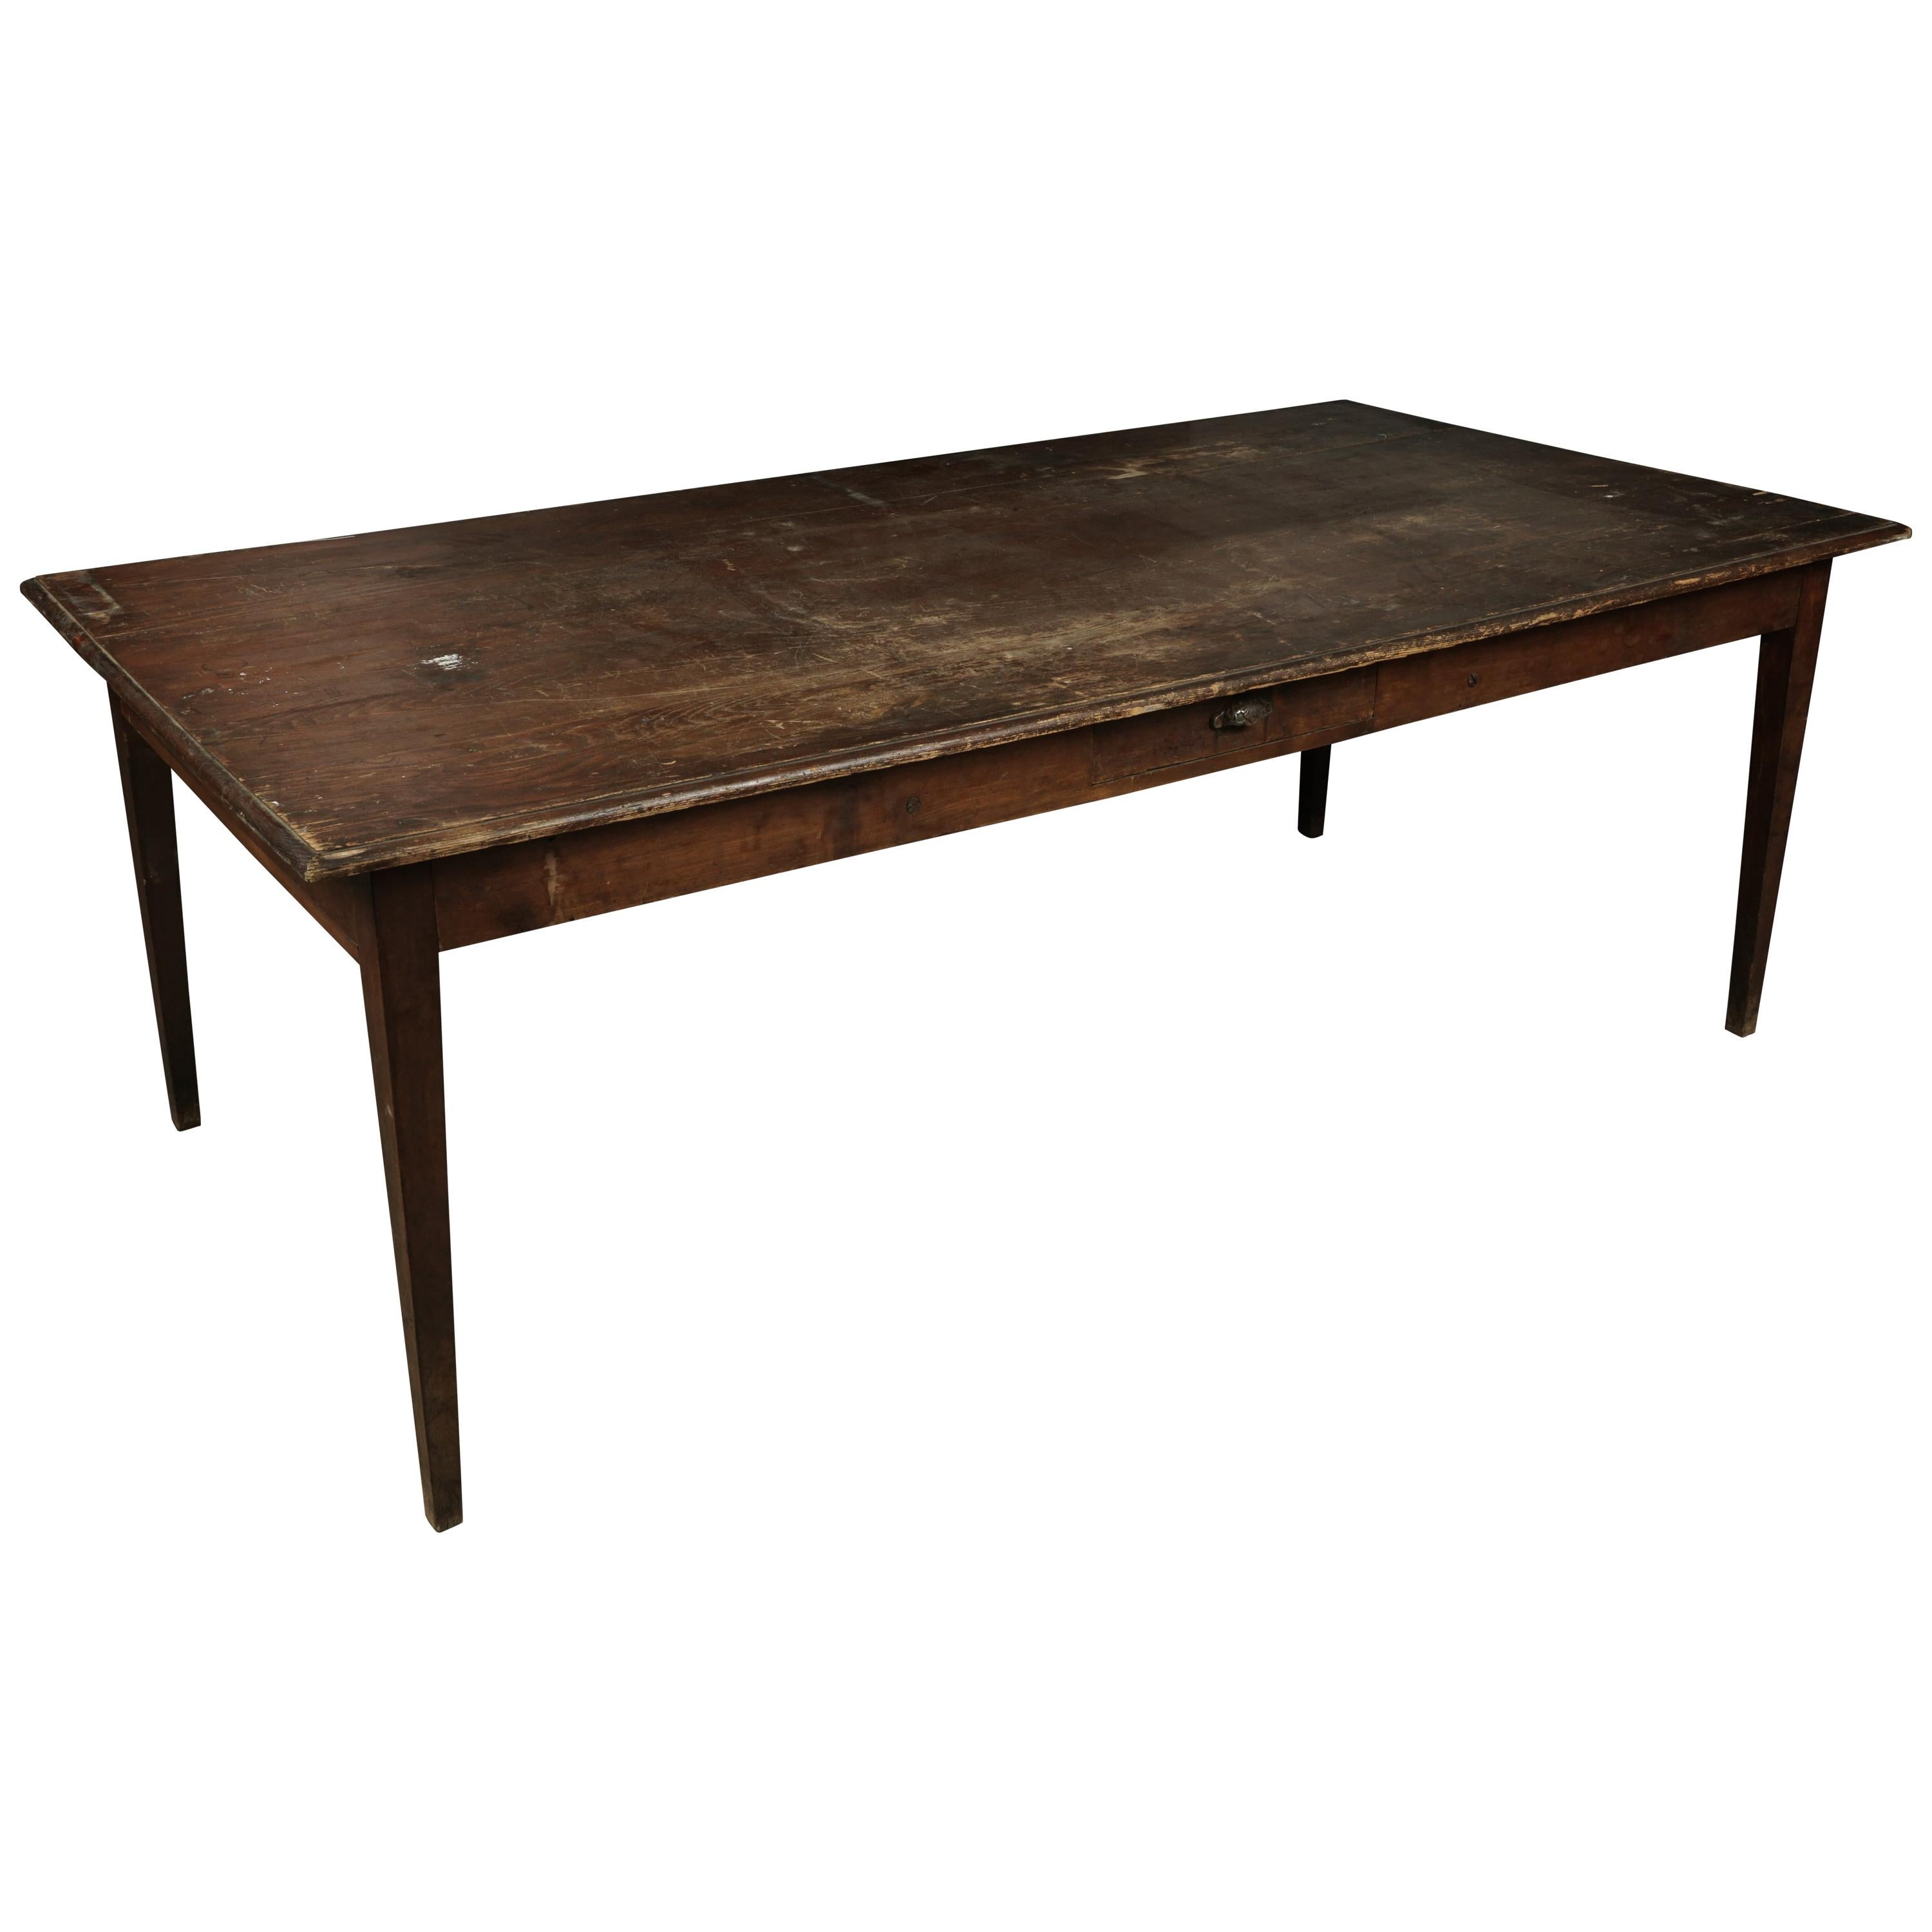 Large Farm Table from France, circa 1920